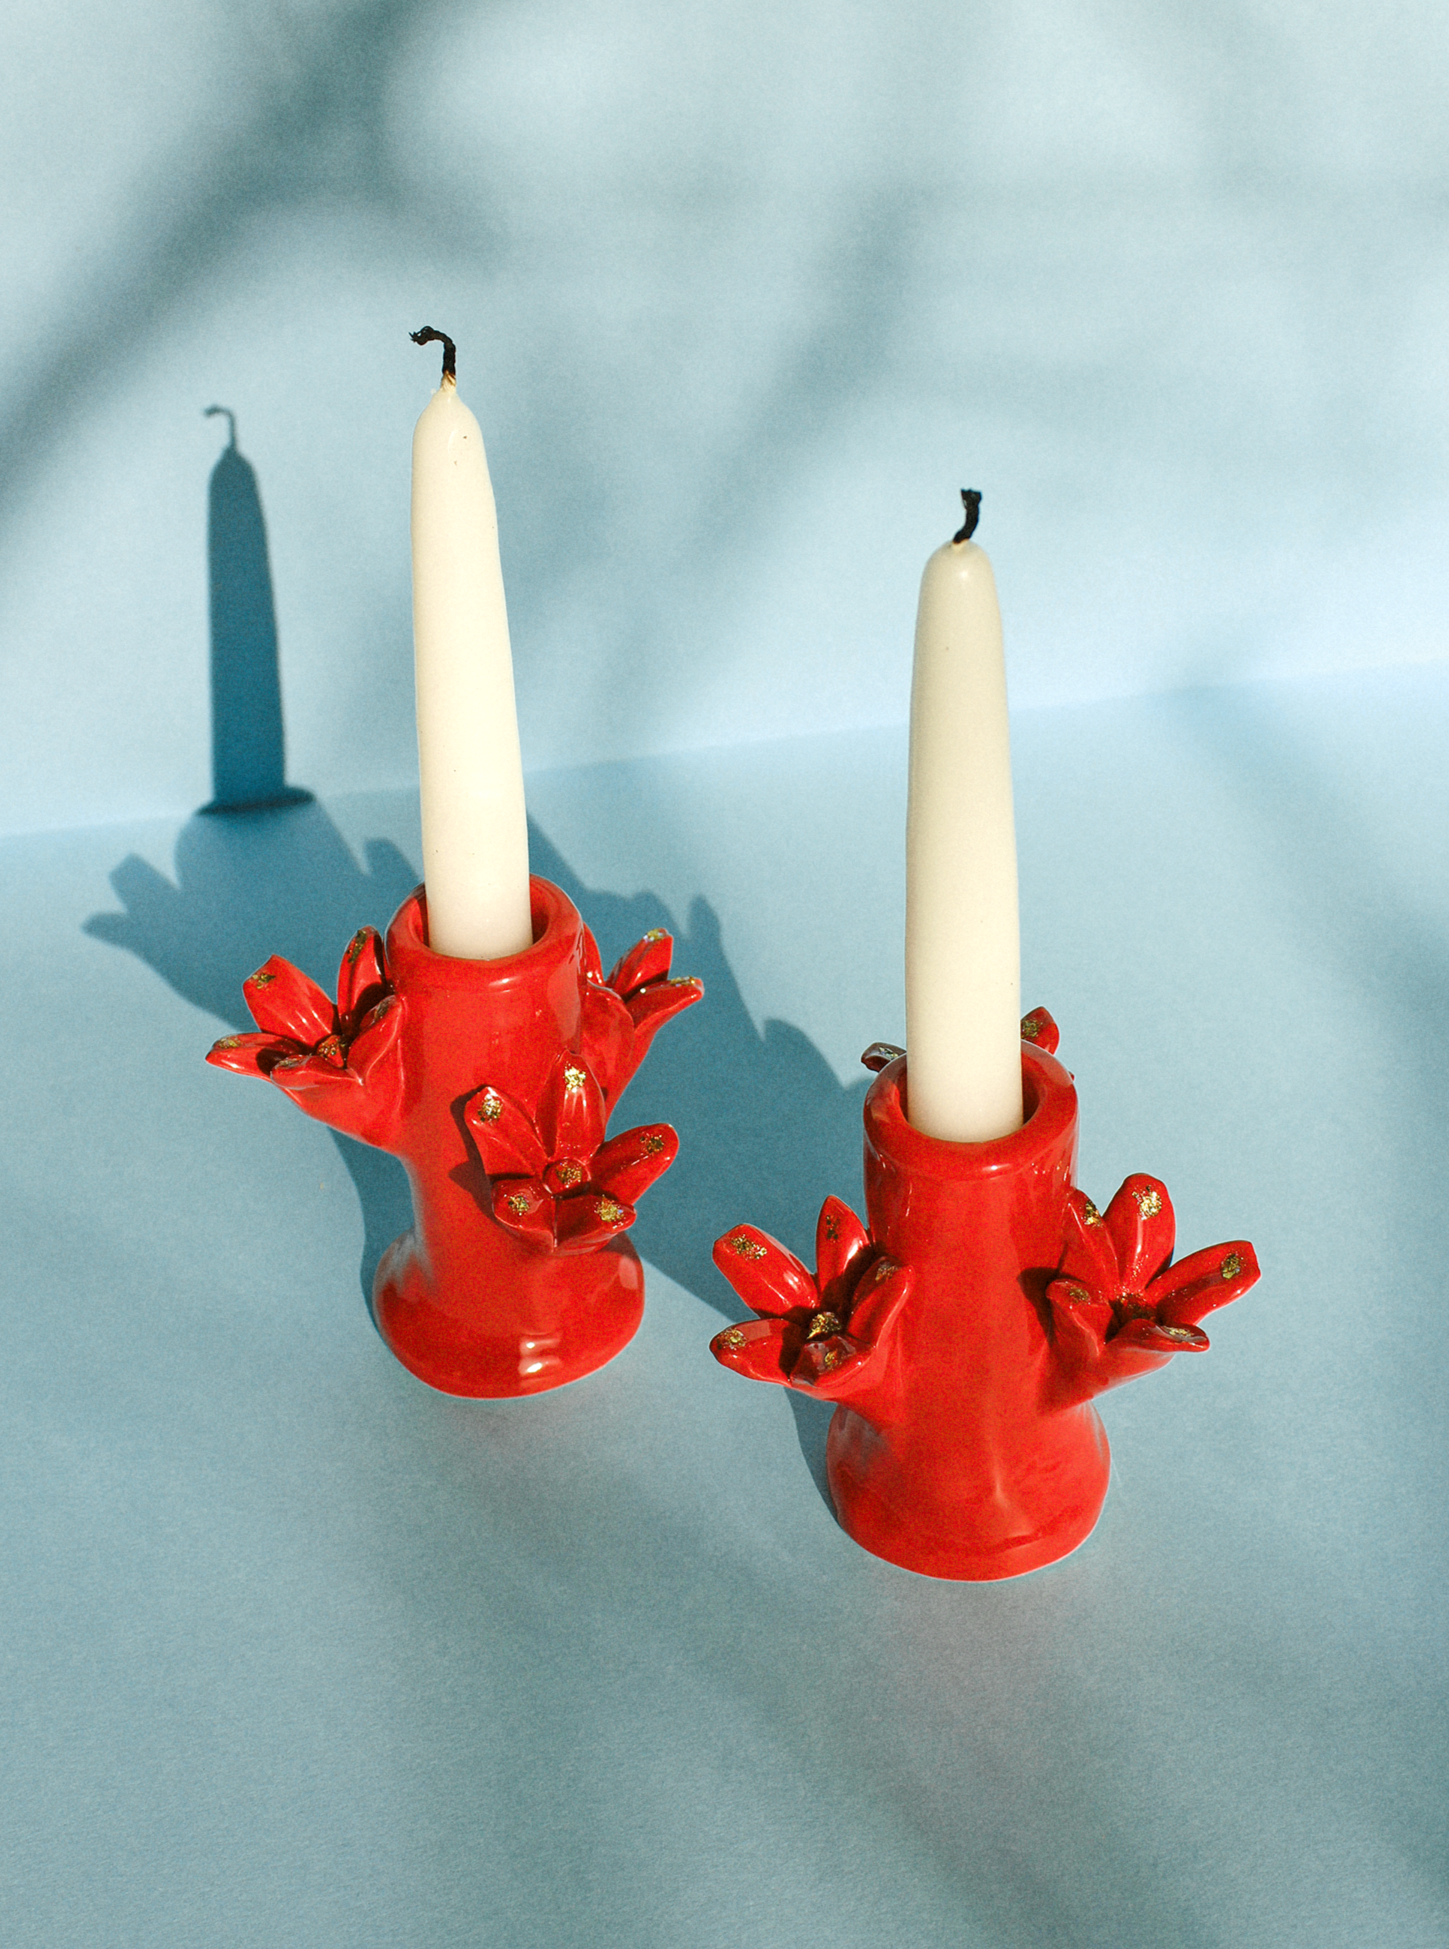 Two Flores Candleholder Sets - Rojo by Casa Veronica, each with a white candle, on a surface under soft lighting casting gentle shadows. These handcrafted candleholders make perfect home décor gifts.